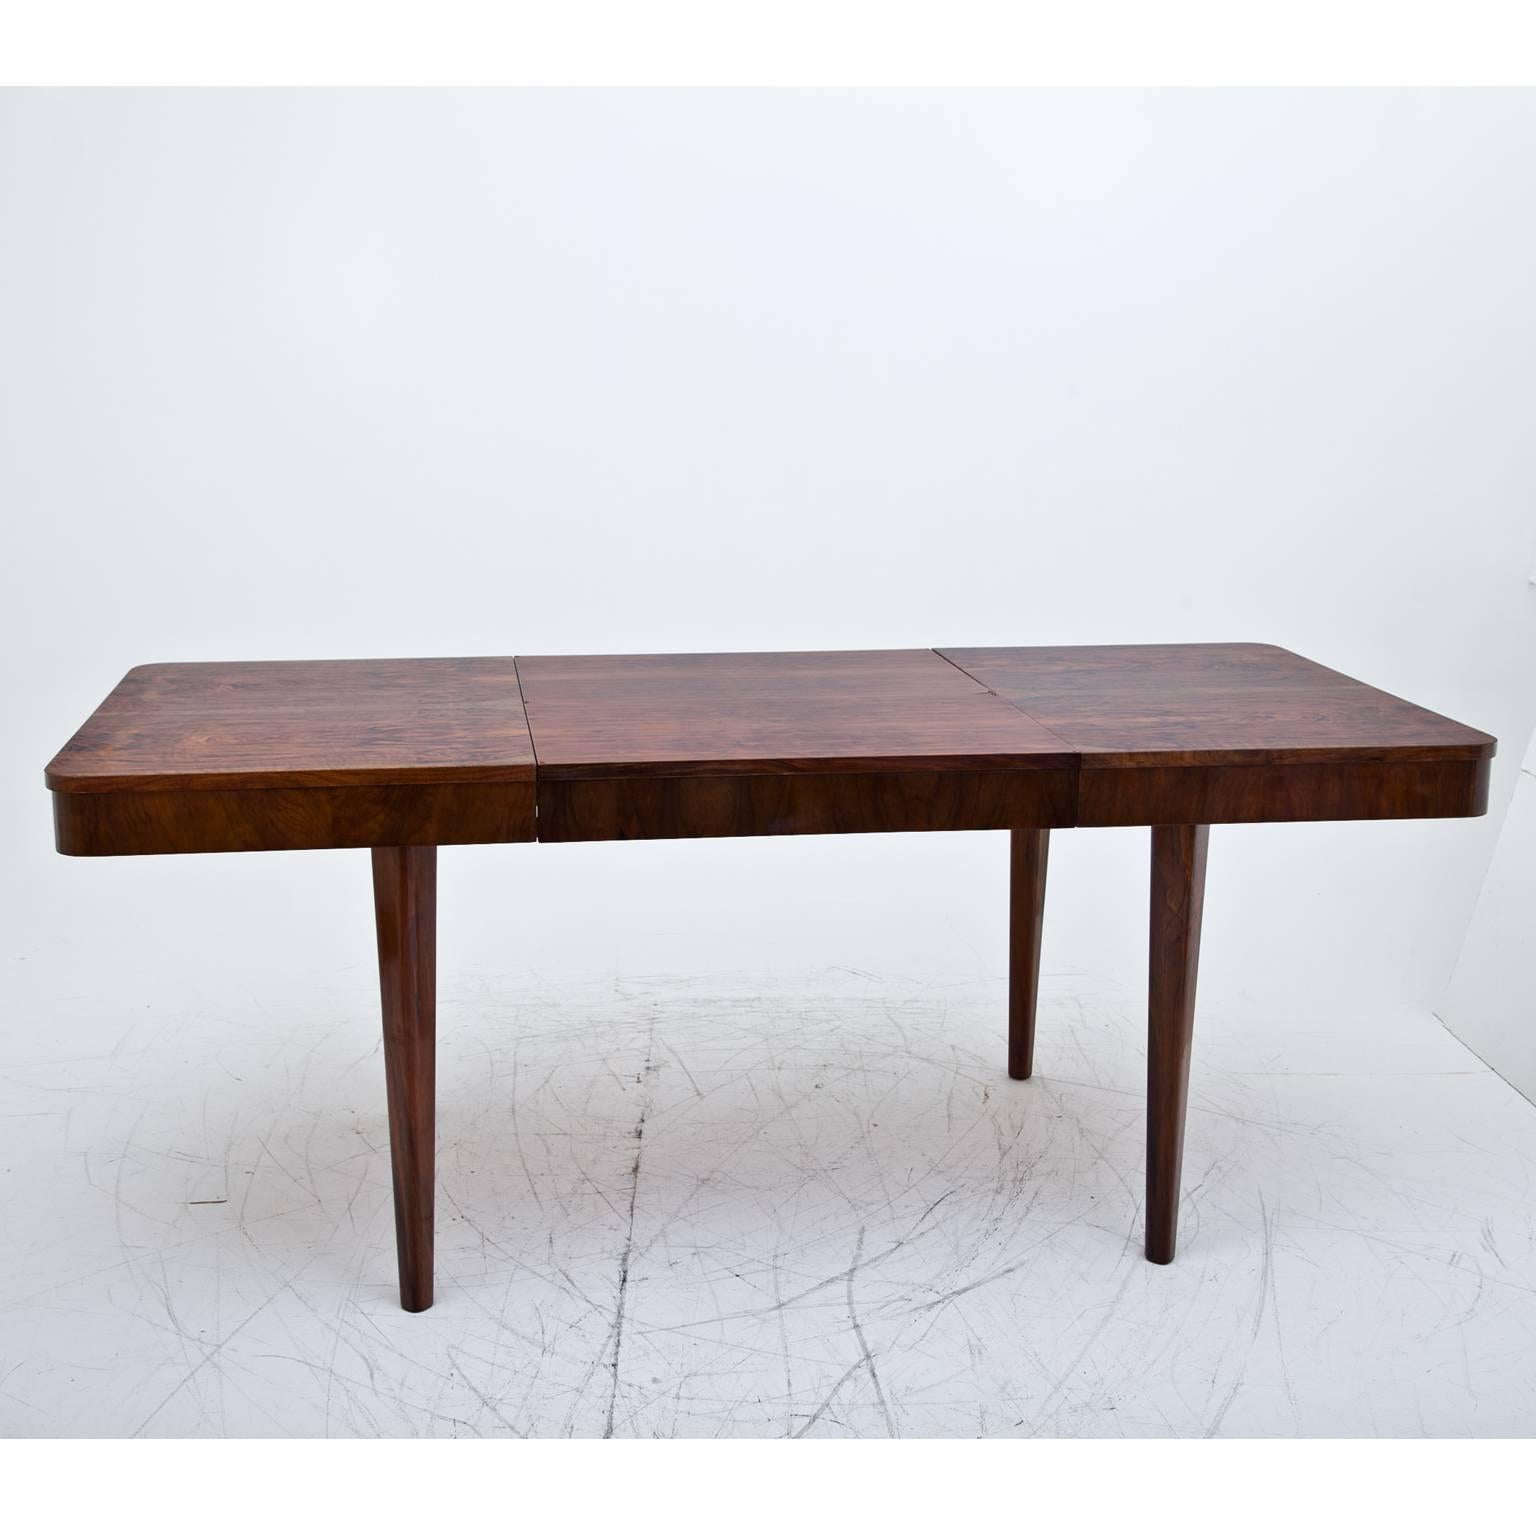 Extendable Art Deco dining room table with rounded corners, on conical legs with a beautiful veneer pattern. The extended table is 190cm wide.